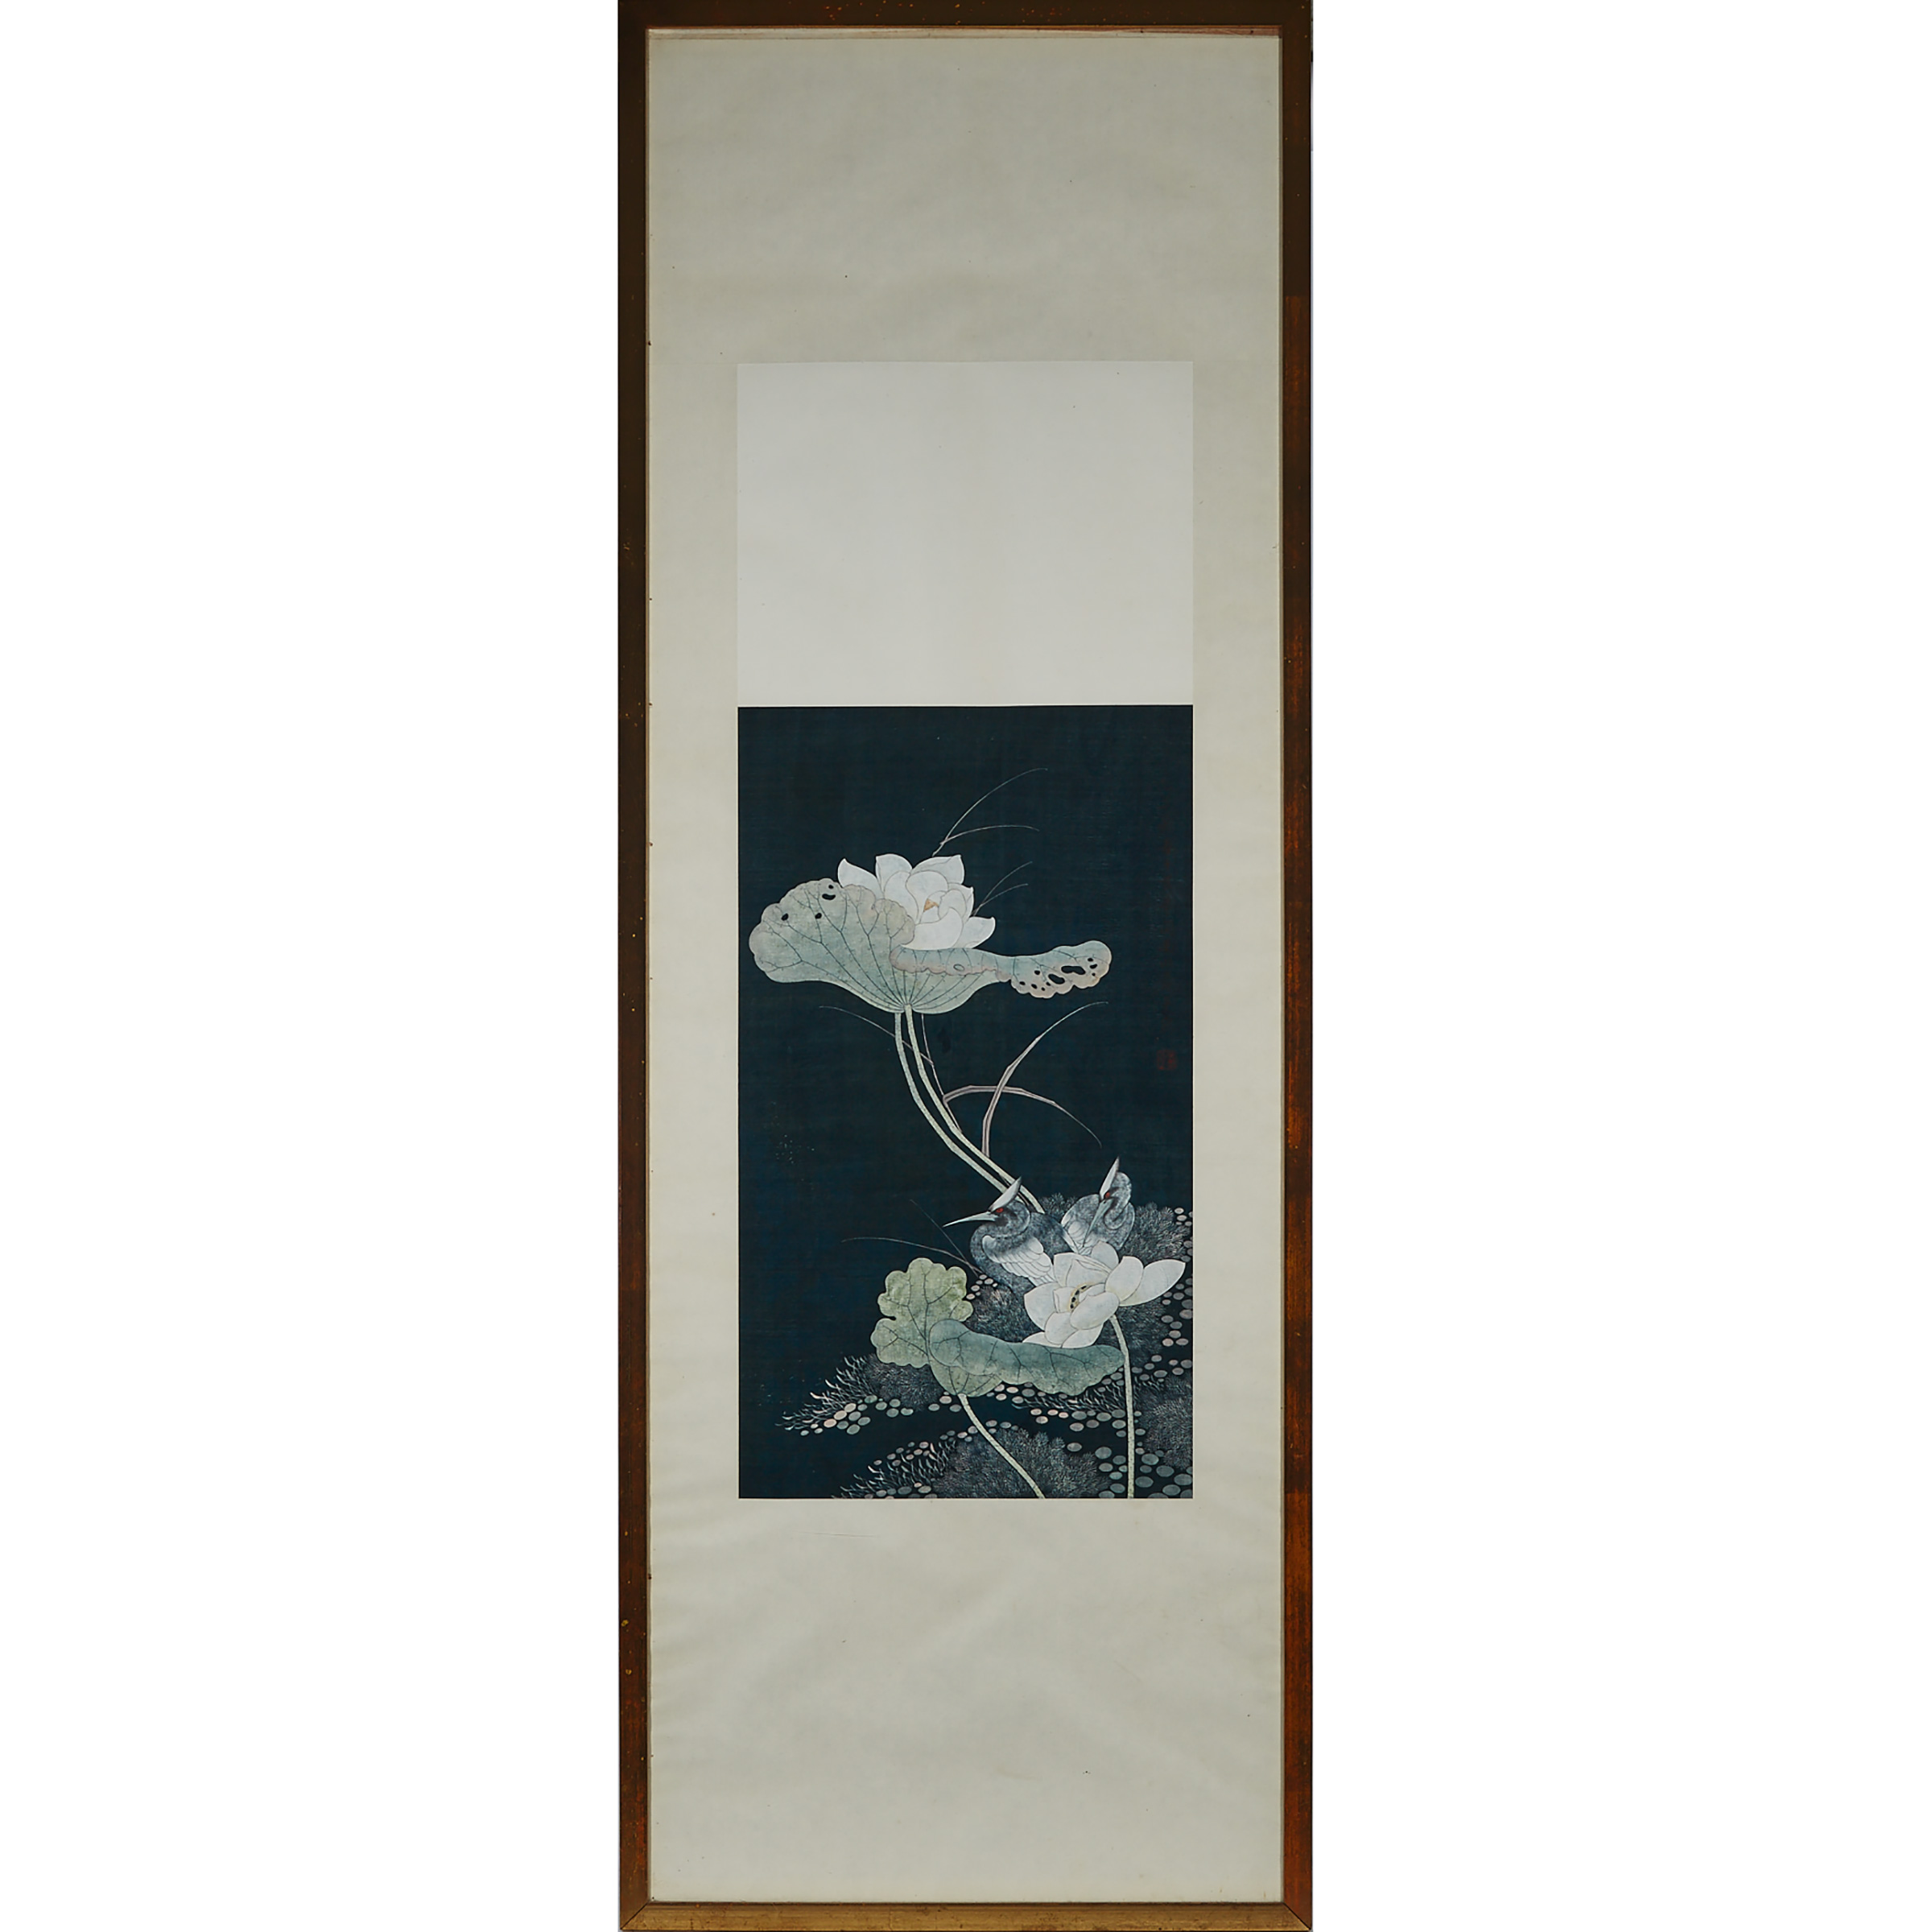 Yun Shouping(1633-1690), Water Lily and Egrets